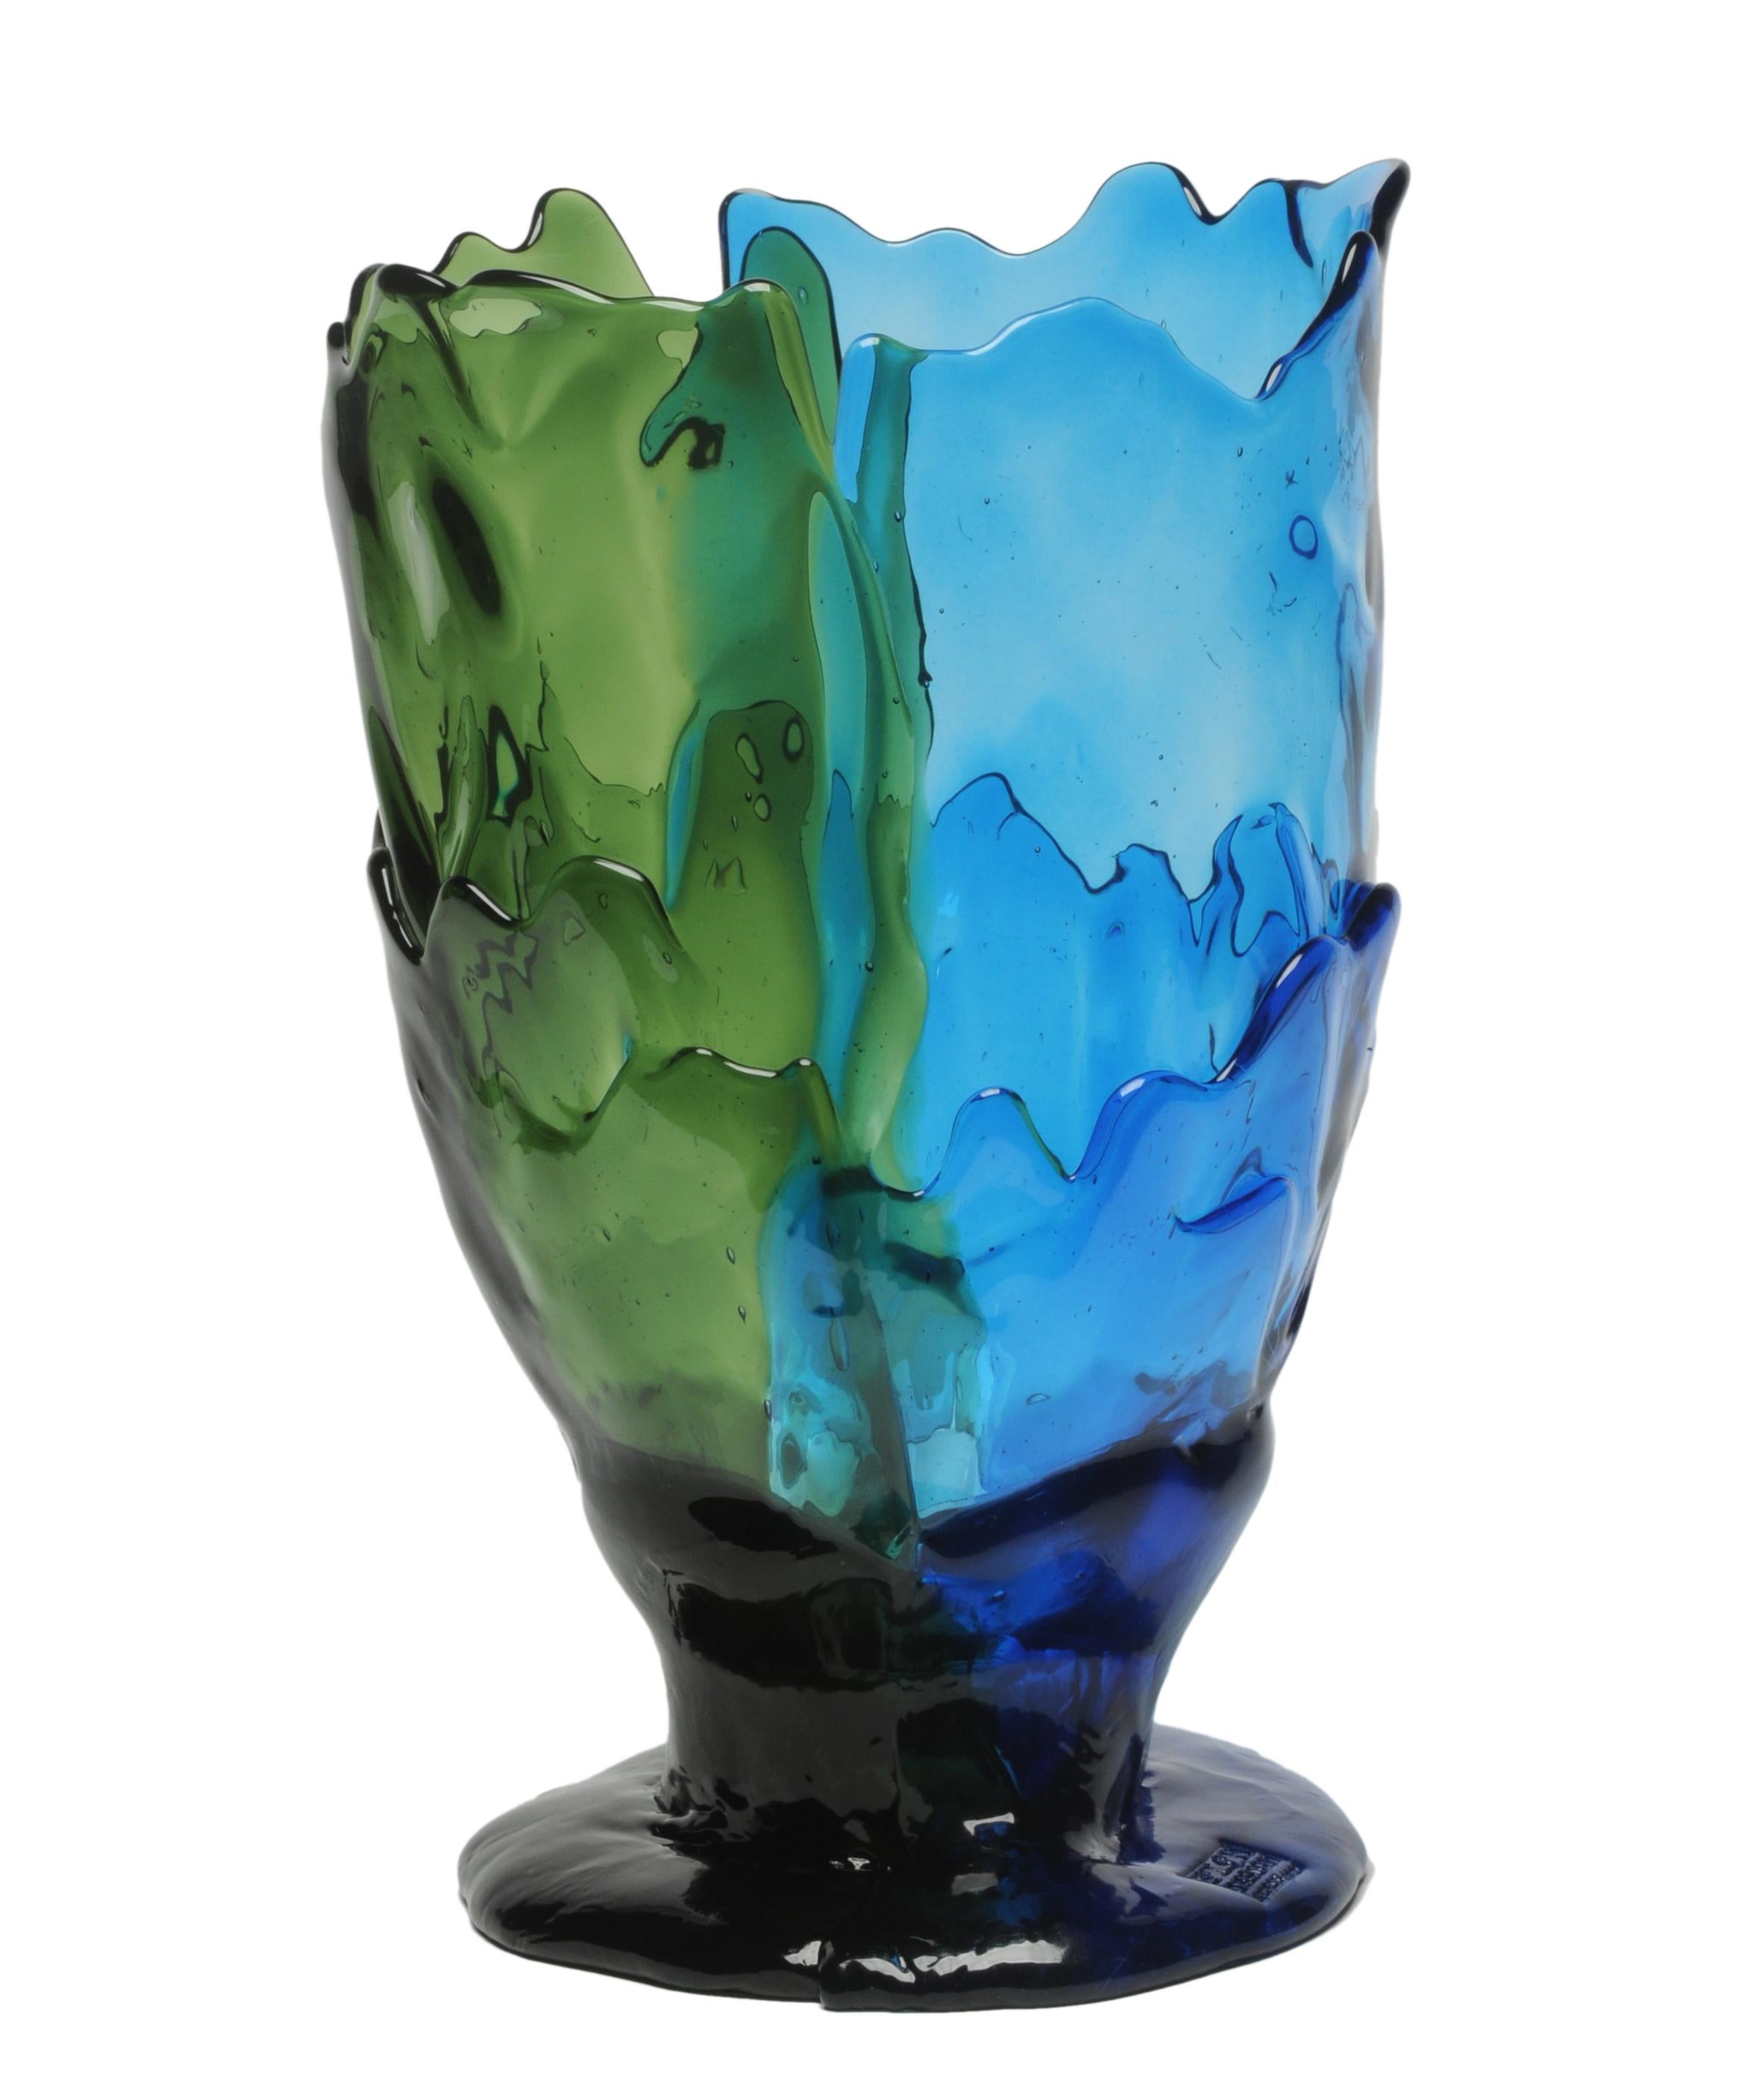 Twin-C vase, clear green and blue.

Vase in soft resin designed by Gaetano Pesce in 1995 for Fish Design collection.

Measures: L - ø 22cm x H 36cm

Other sizes available.

Colours: clear green and blue.

Vase in soft resin designed by Gaetano Pesce